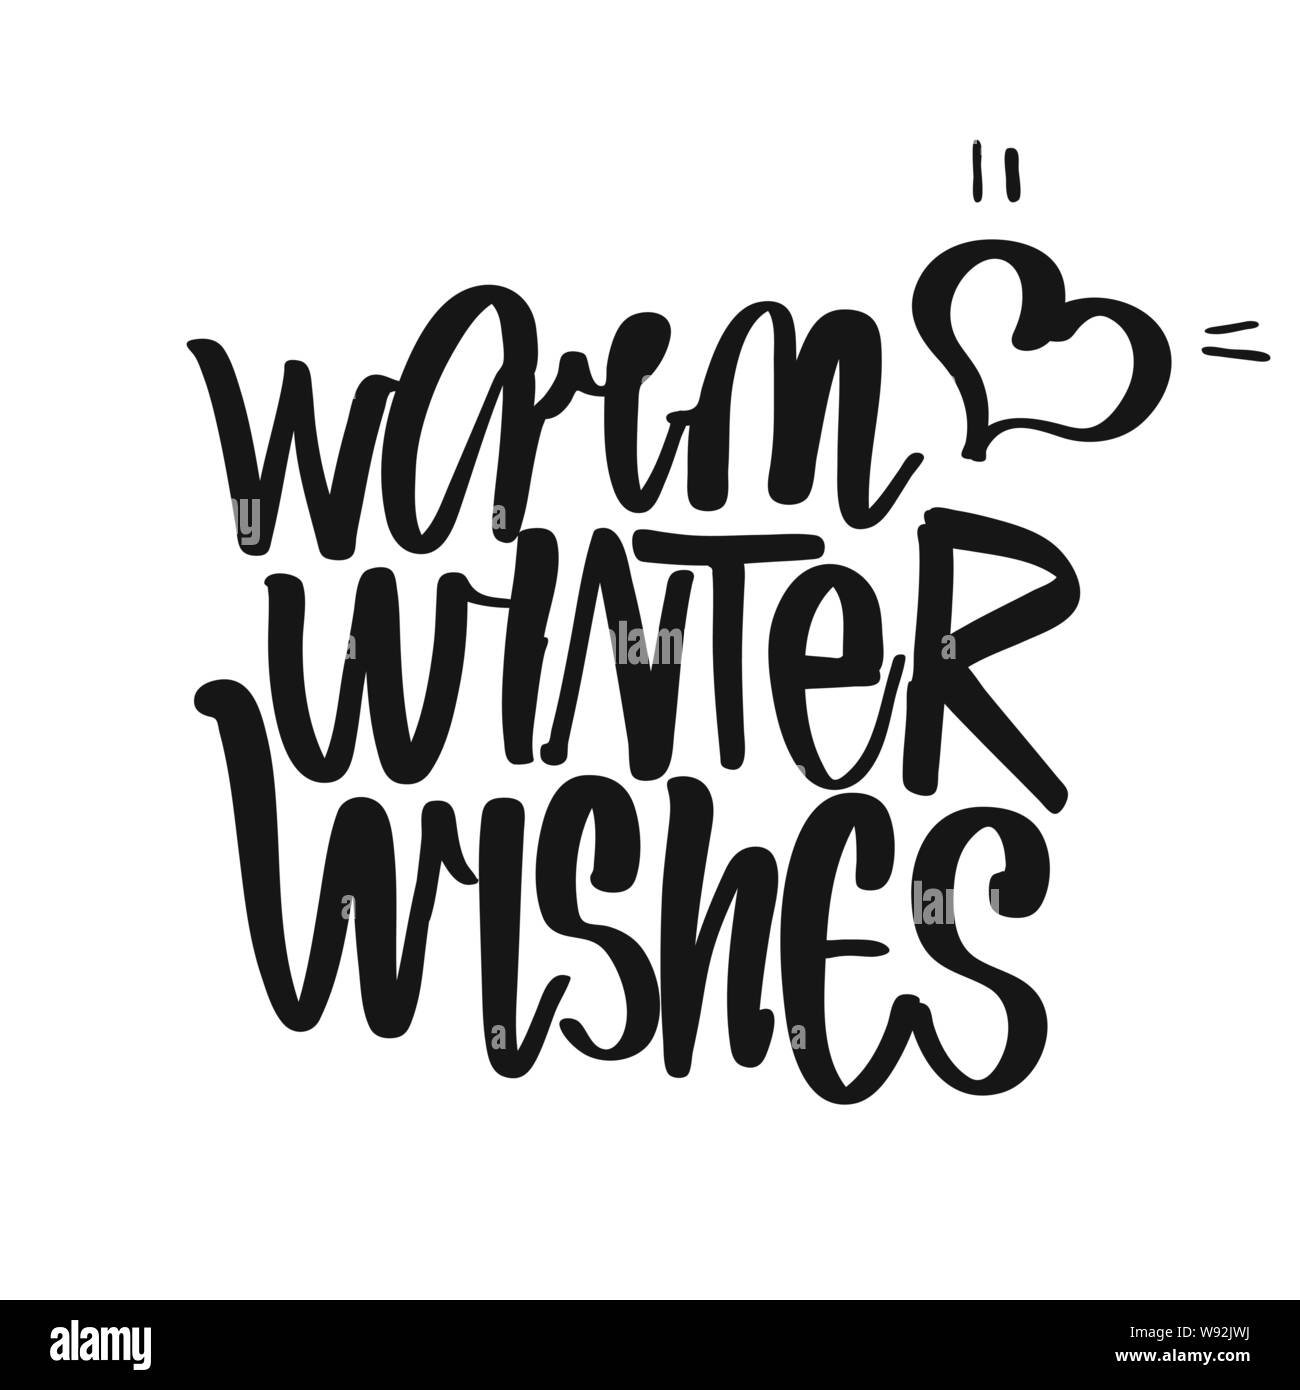 Warm Winter Wishes handwritten lettering. Printable Kitchen art sign for Winter and Festive topics. Stock Vector